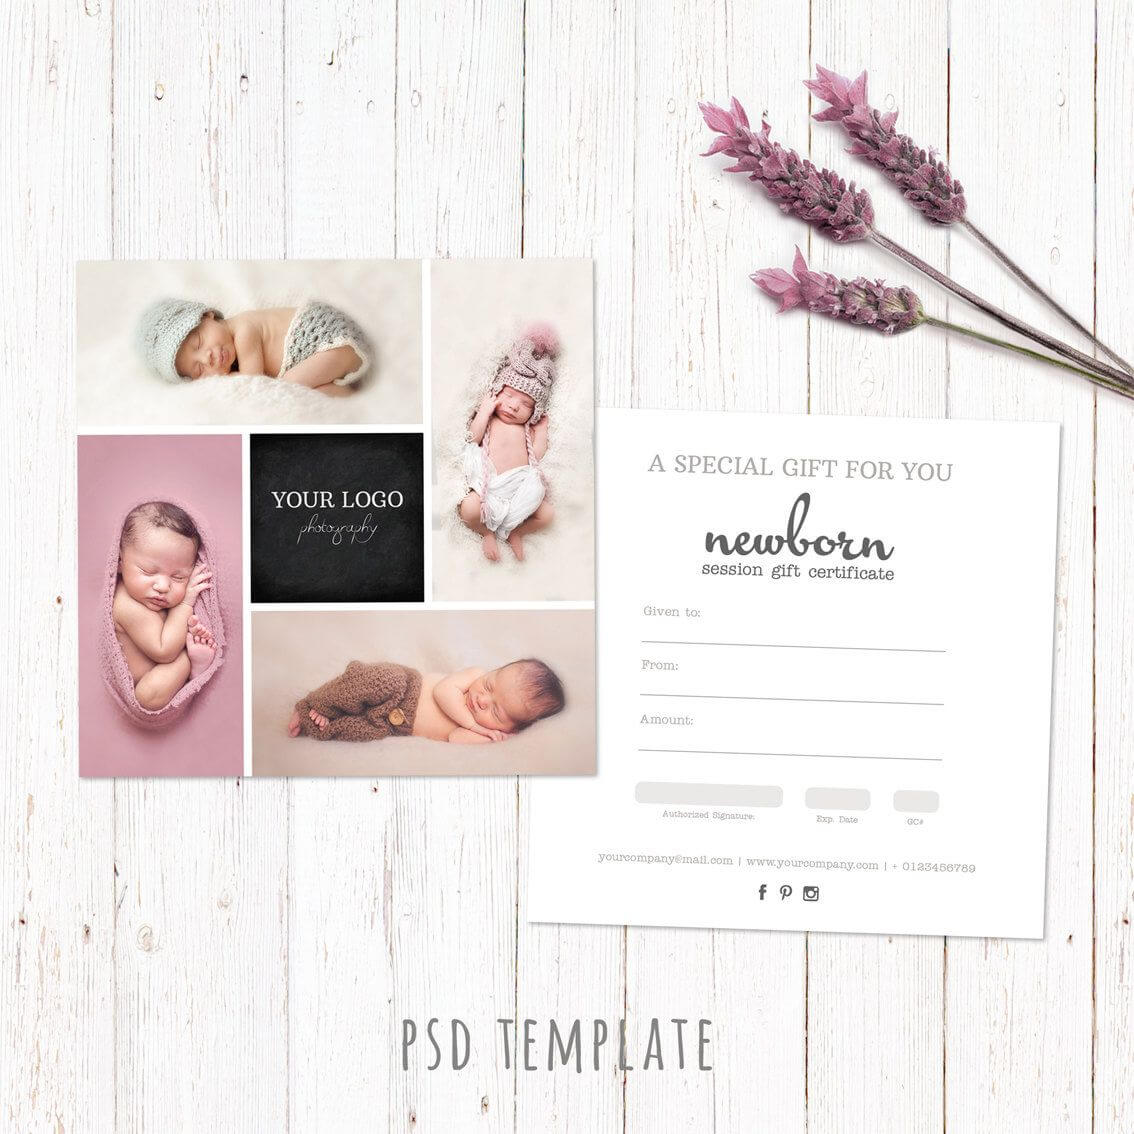 Gift Certificate Template. Newborn Session Photography Gift Throughout Photoshoot Gift Certificate Template